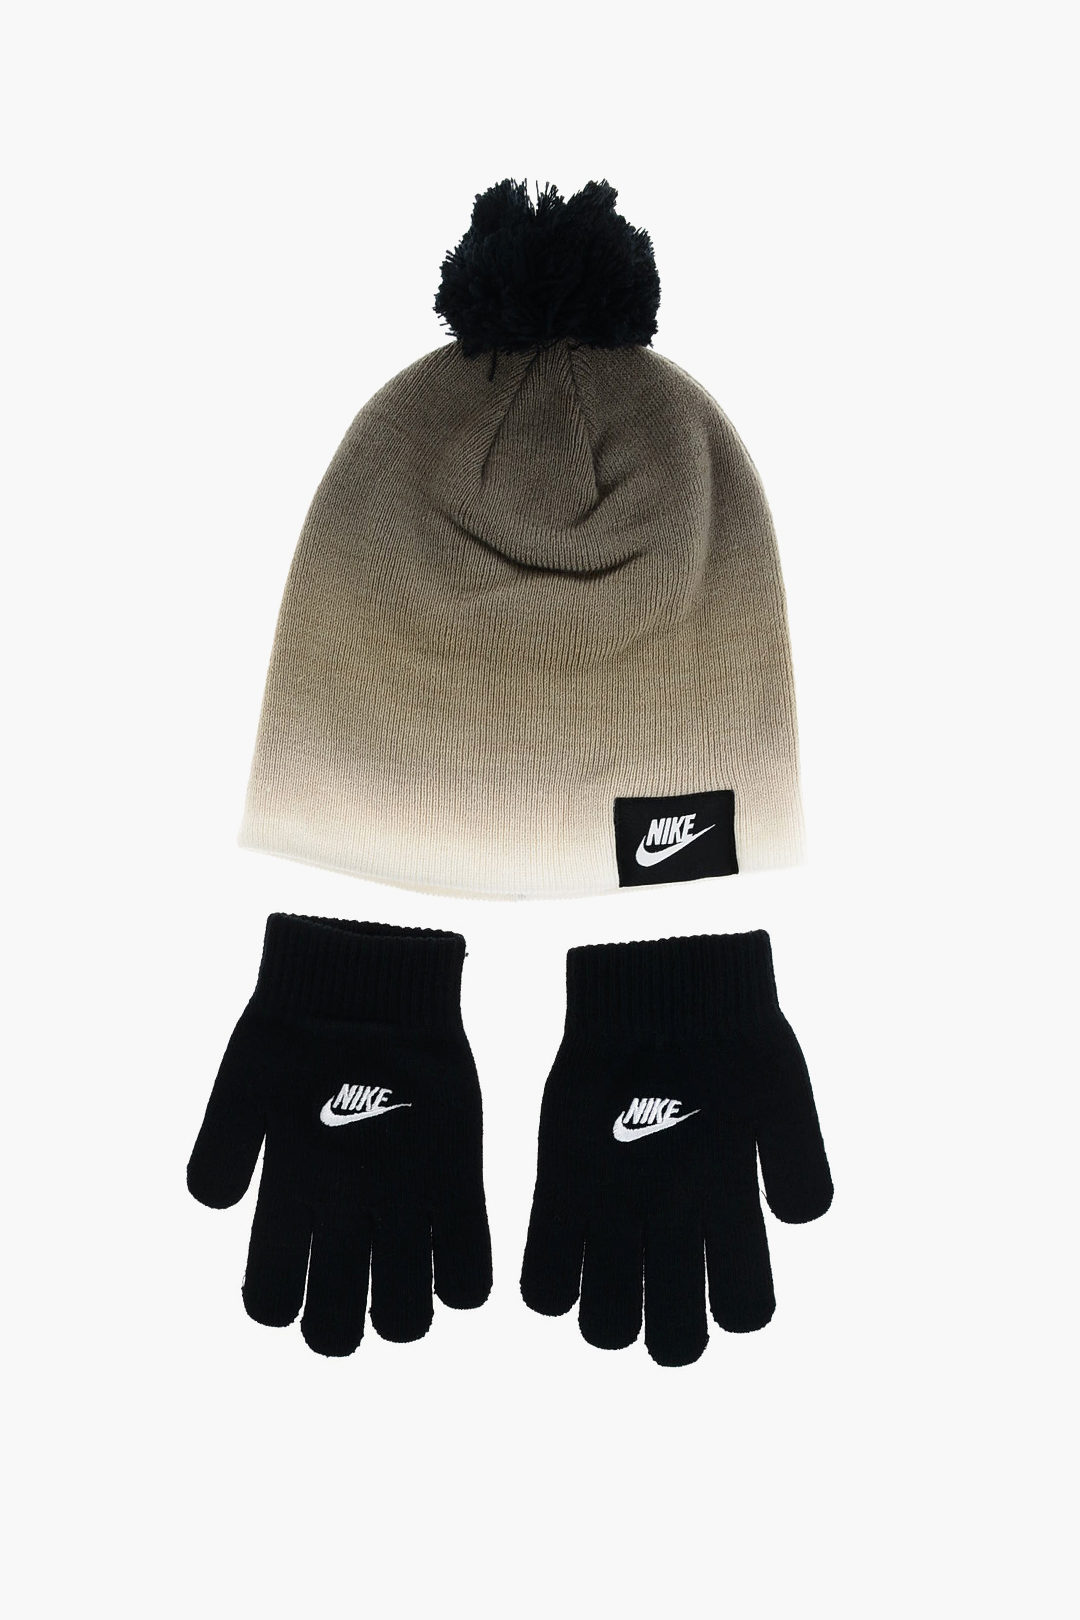 Boys Nike hat and gloves - core-global.org